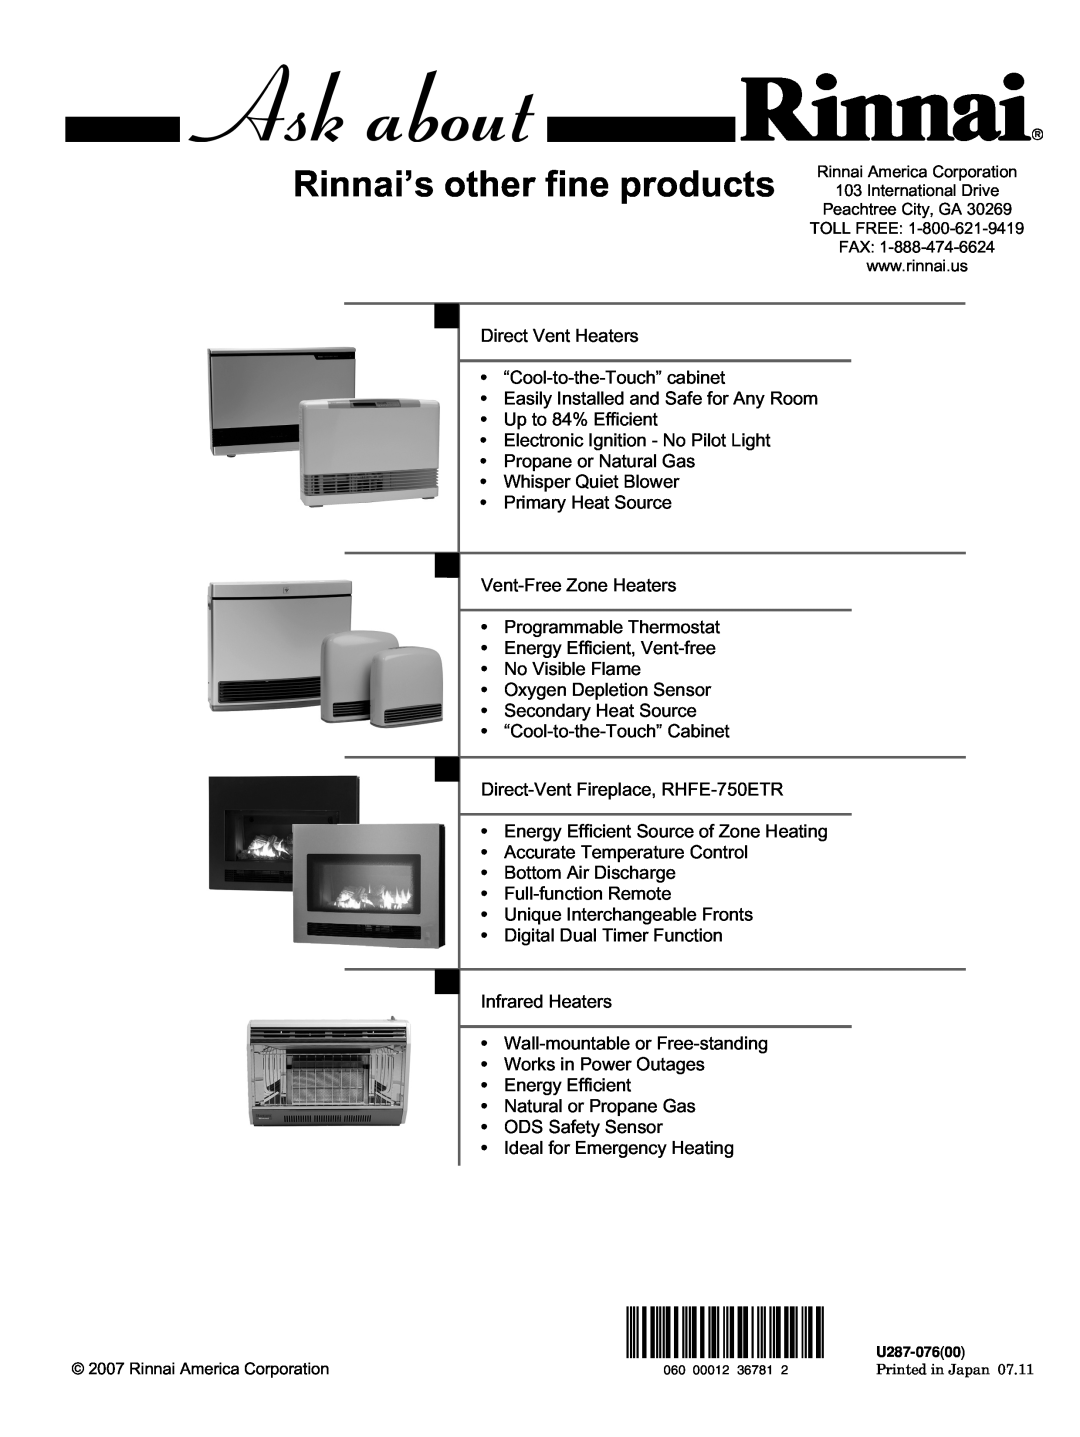 Rinnai REU-VA3237FFU installation manual Direct Vent Heaters “Cool-to-the-Touch”cabinet 